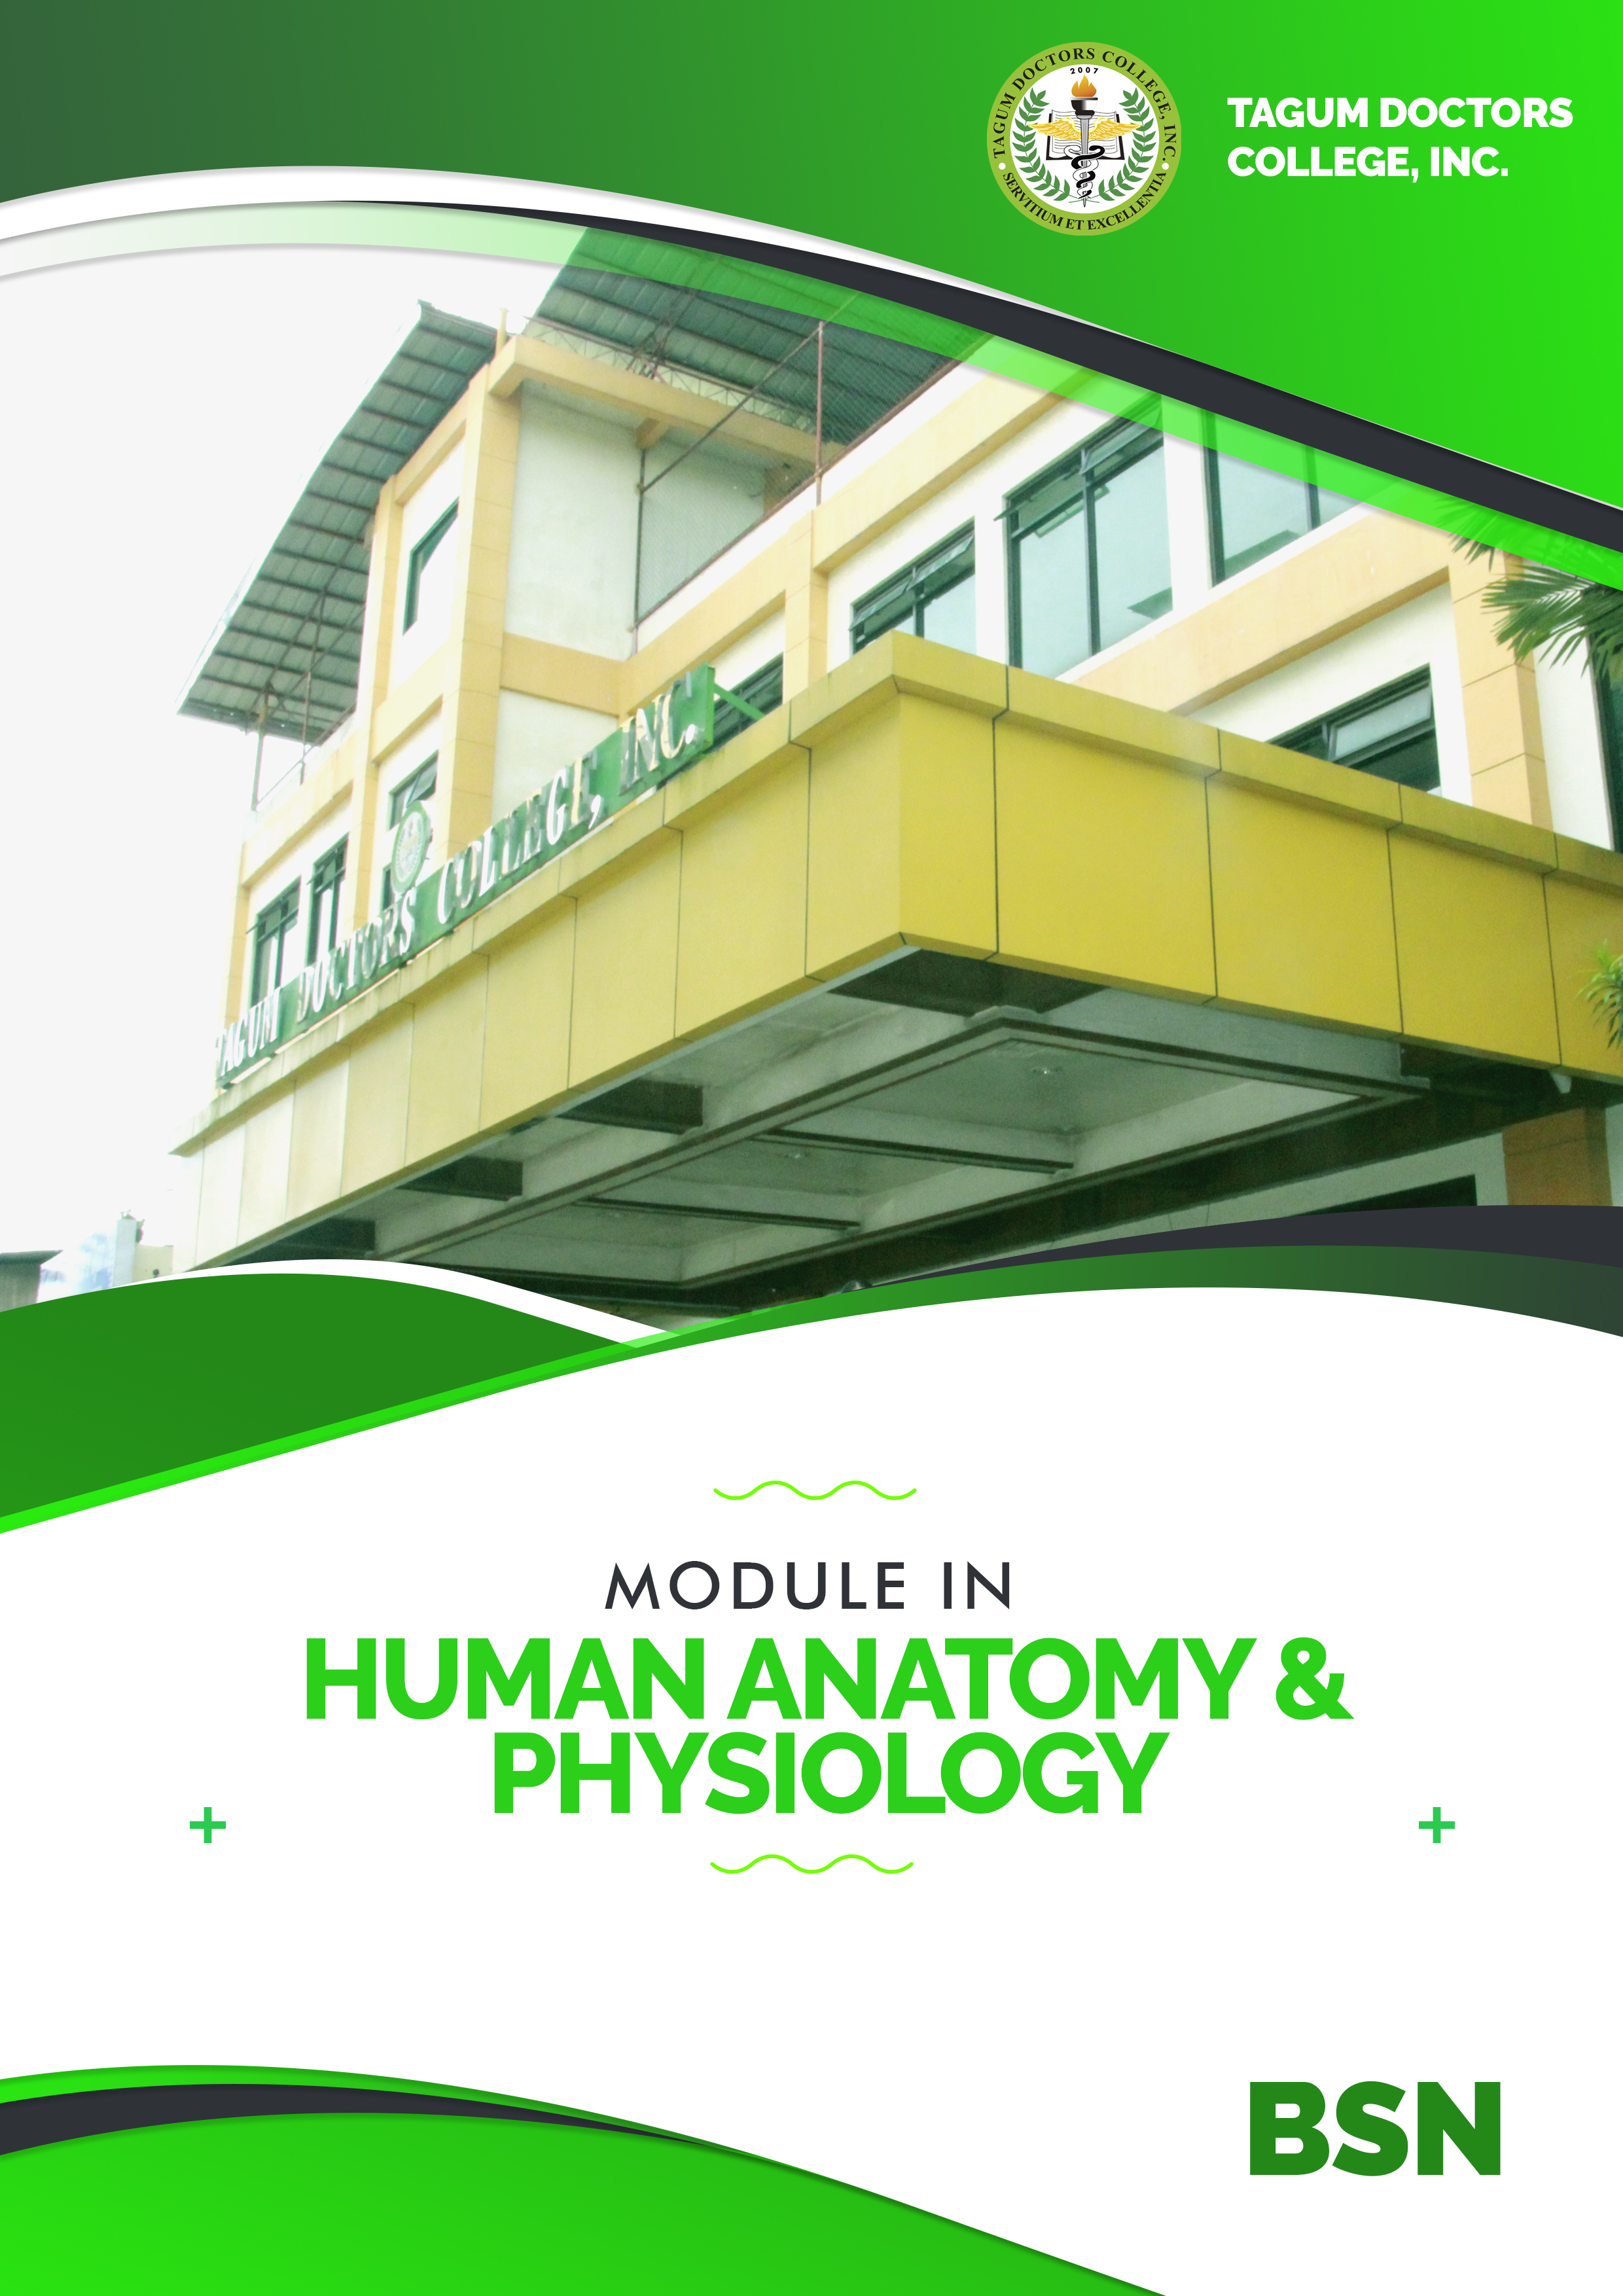 Human Anatomy and Physiology Lec - BSN 1-E